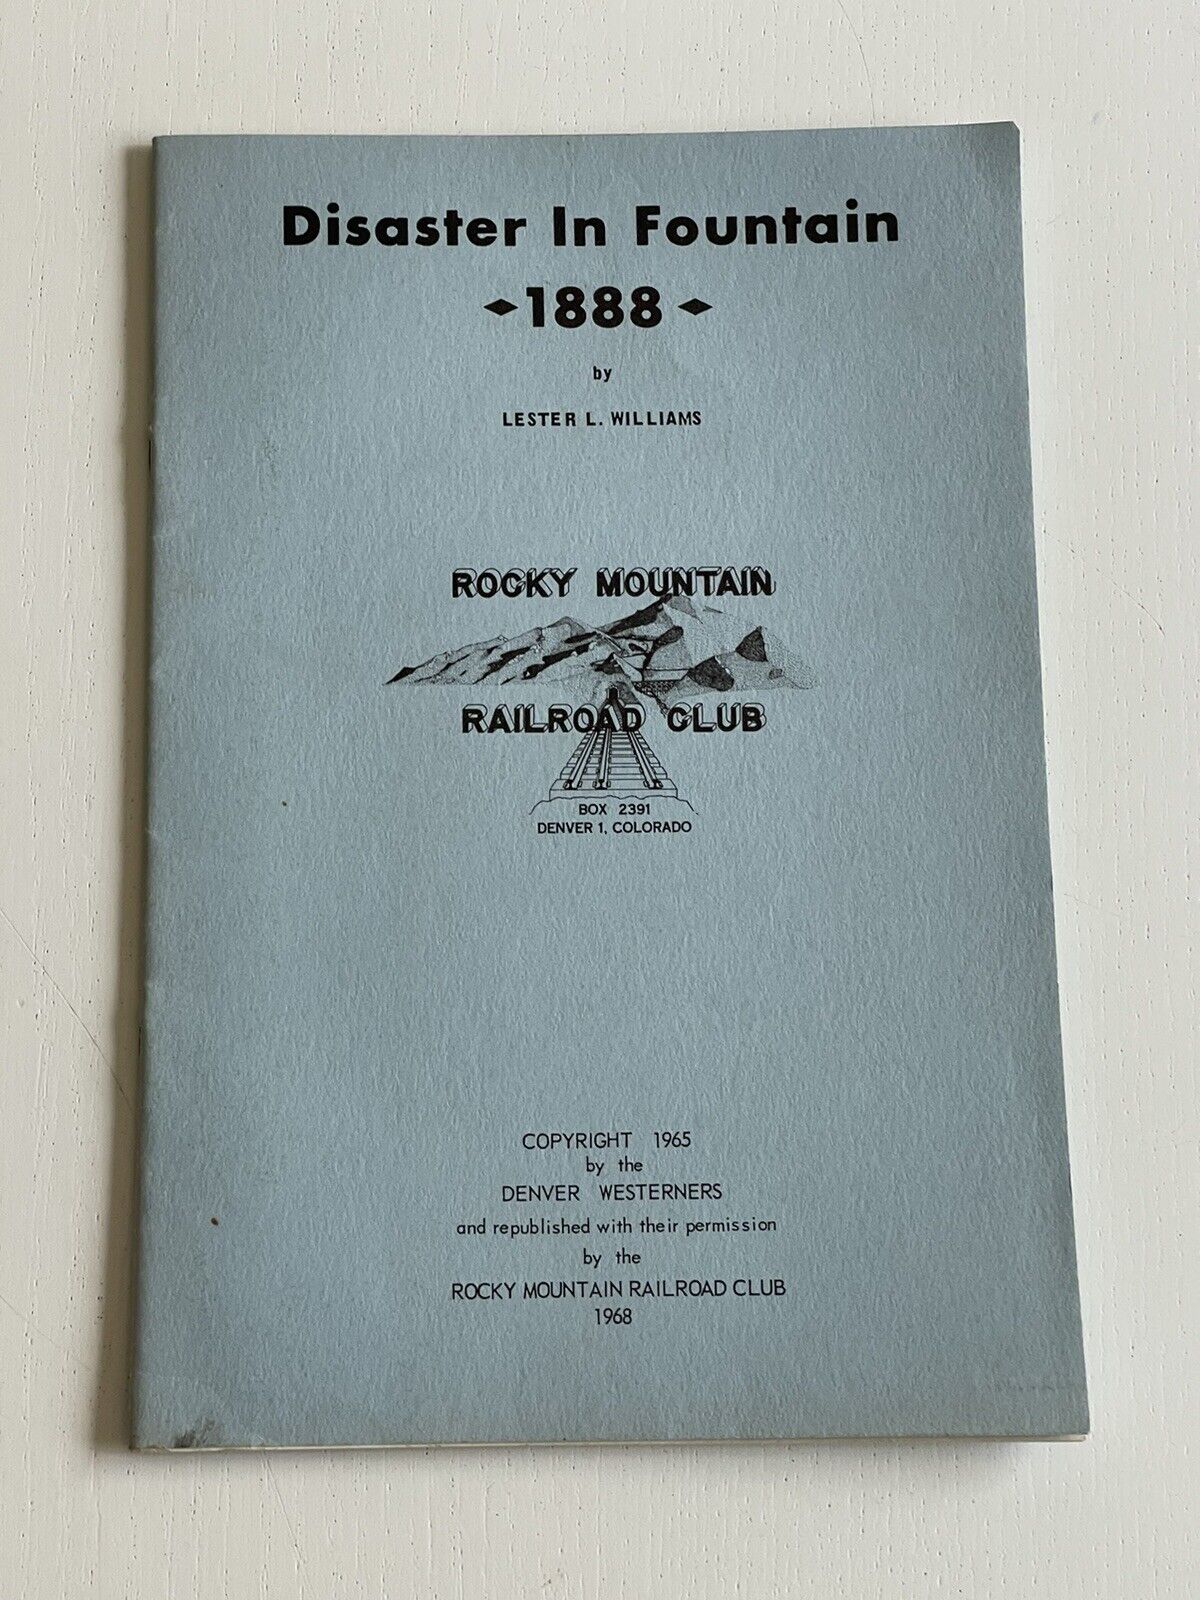 Disaster in Fountain 1888 Train Disaster Paperback Rocky Mountain Book Club 1968